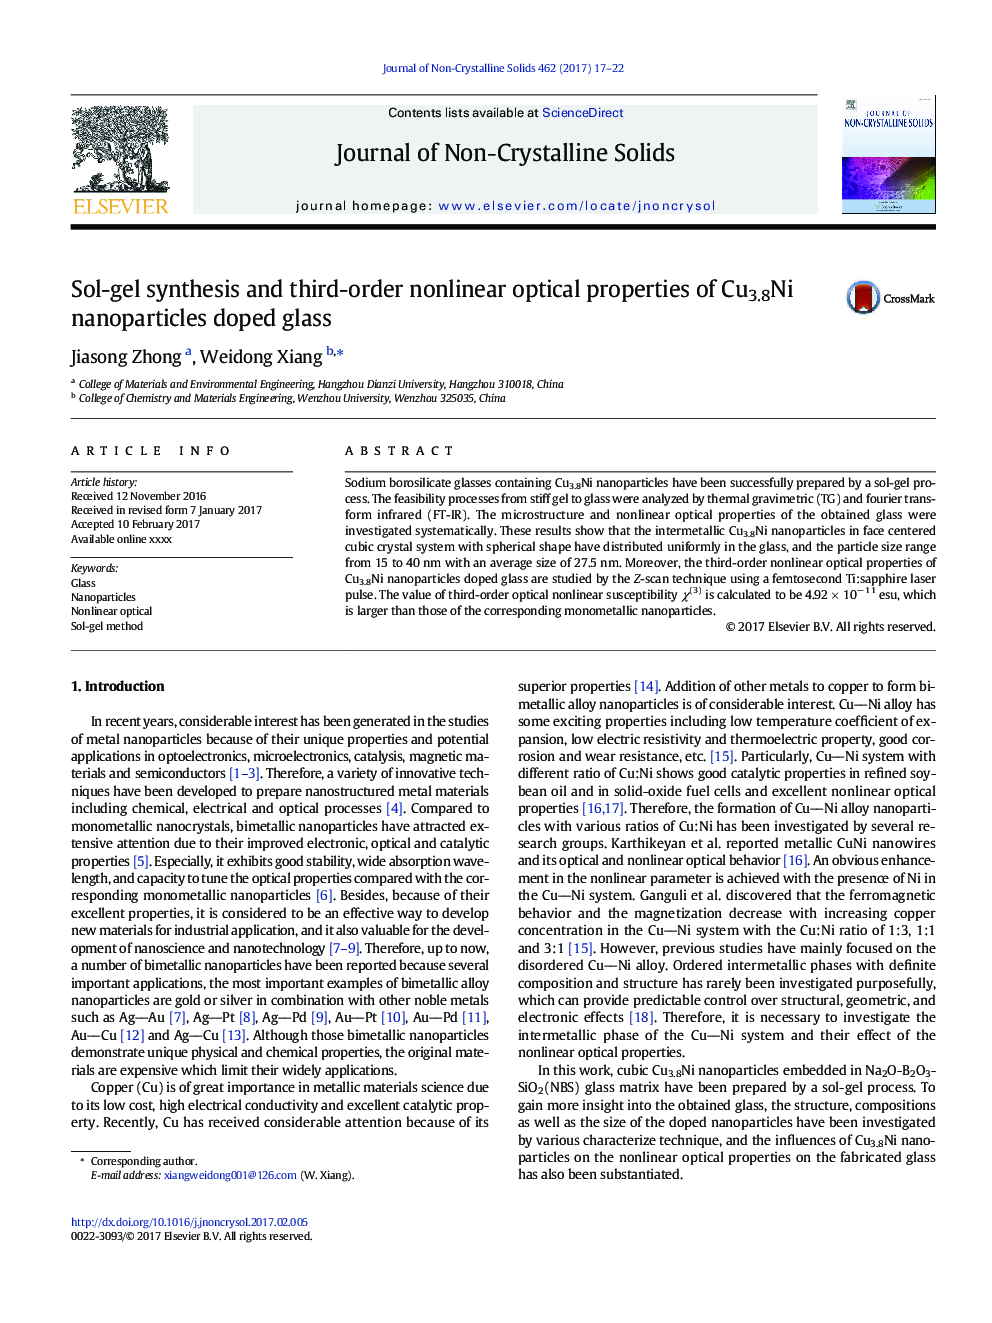 Sol-gel synthesis and third-order nonlinear optical properties of Cu3.8Ni nanoparticles doped glass